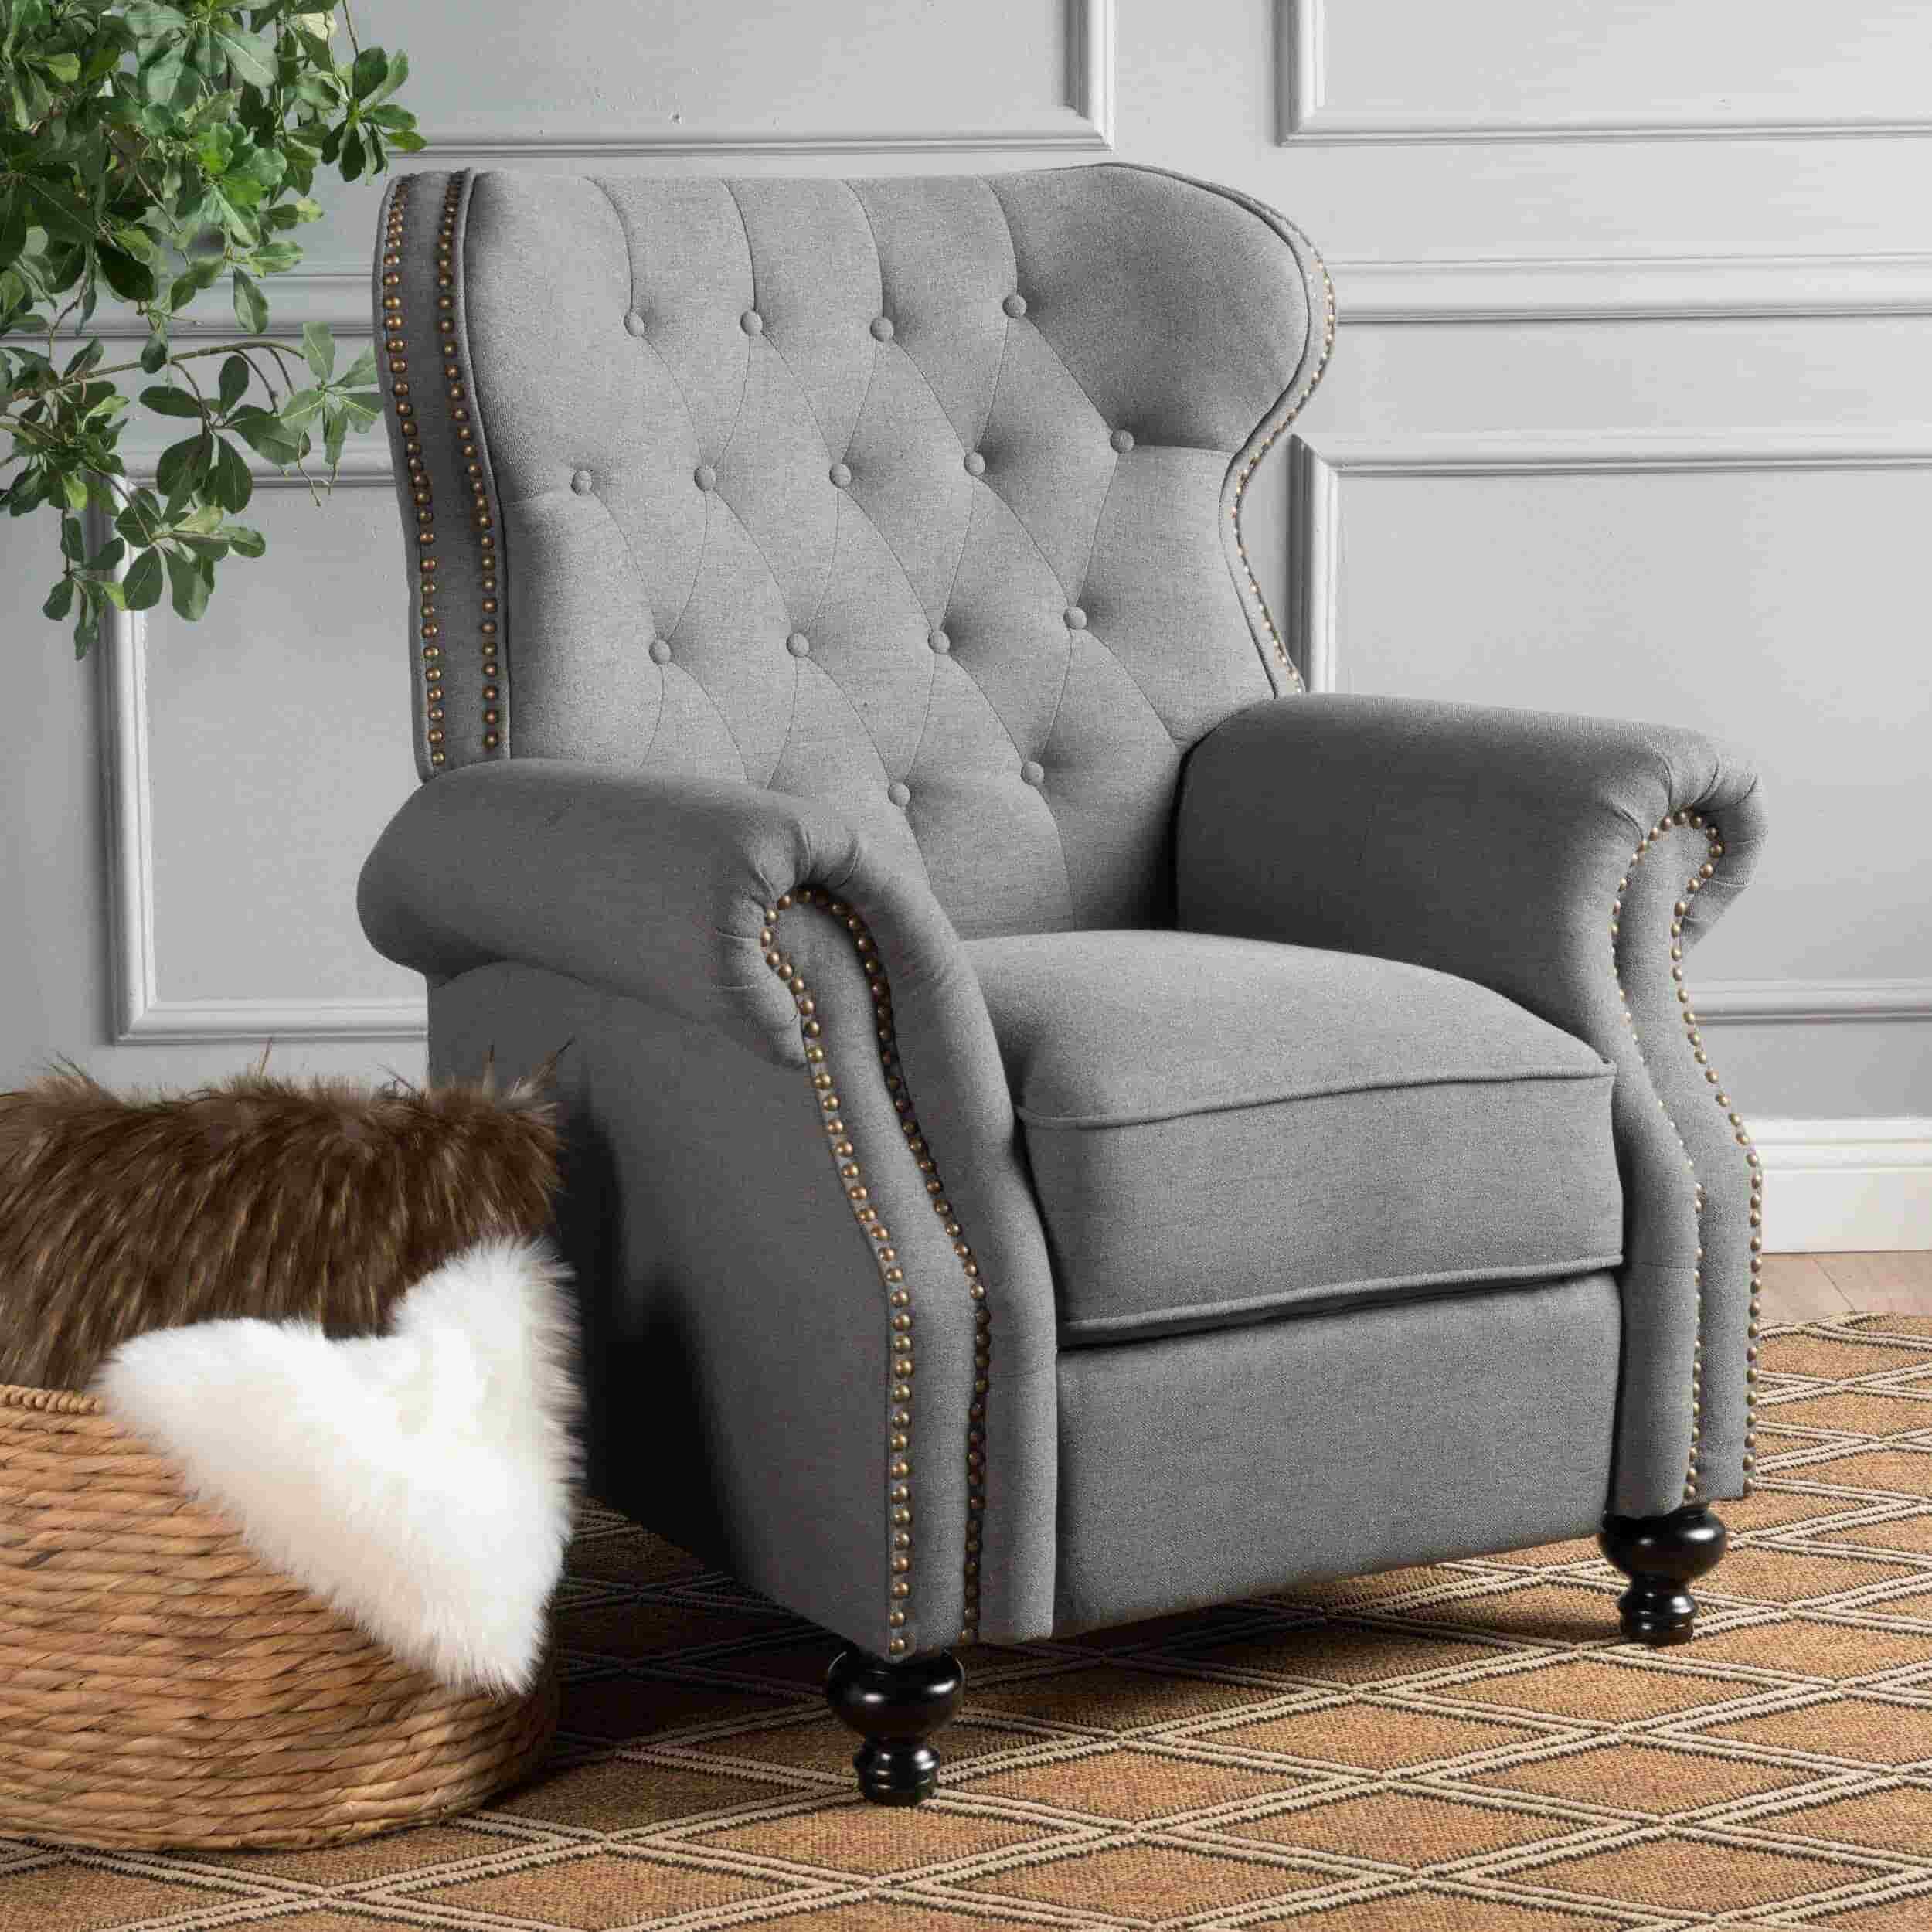 Fabric Recliners 